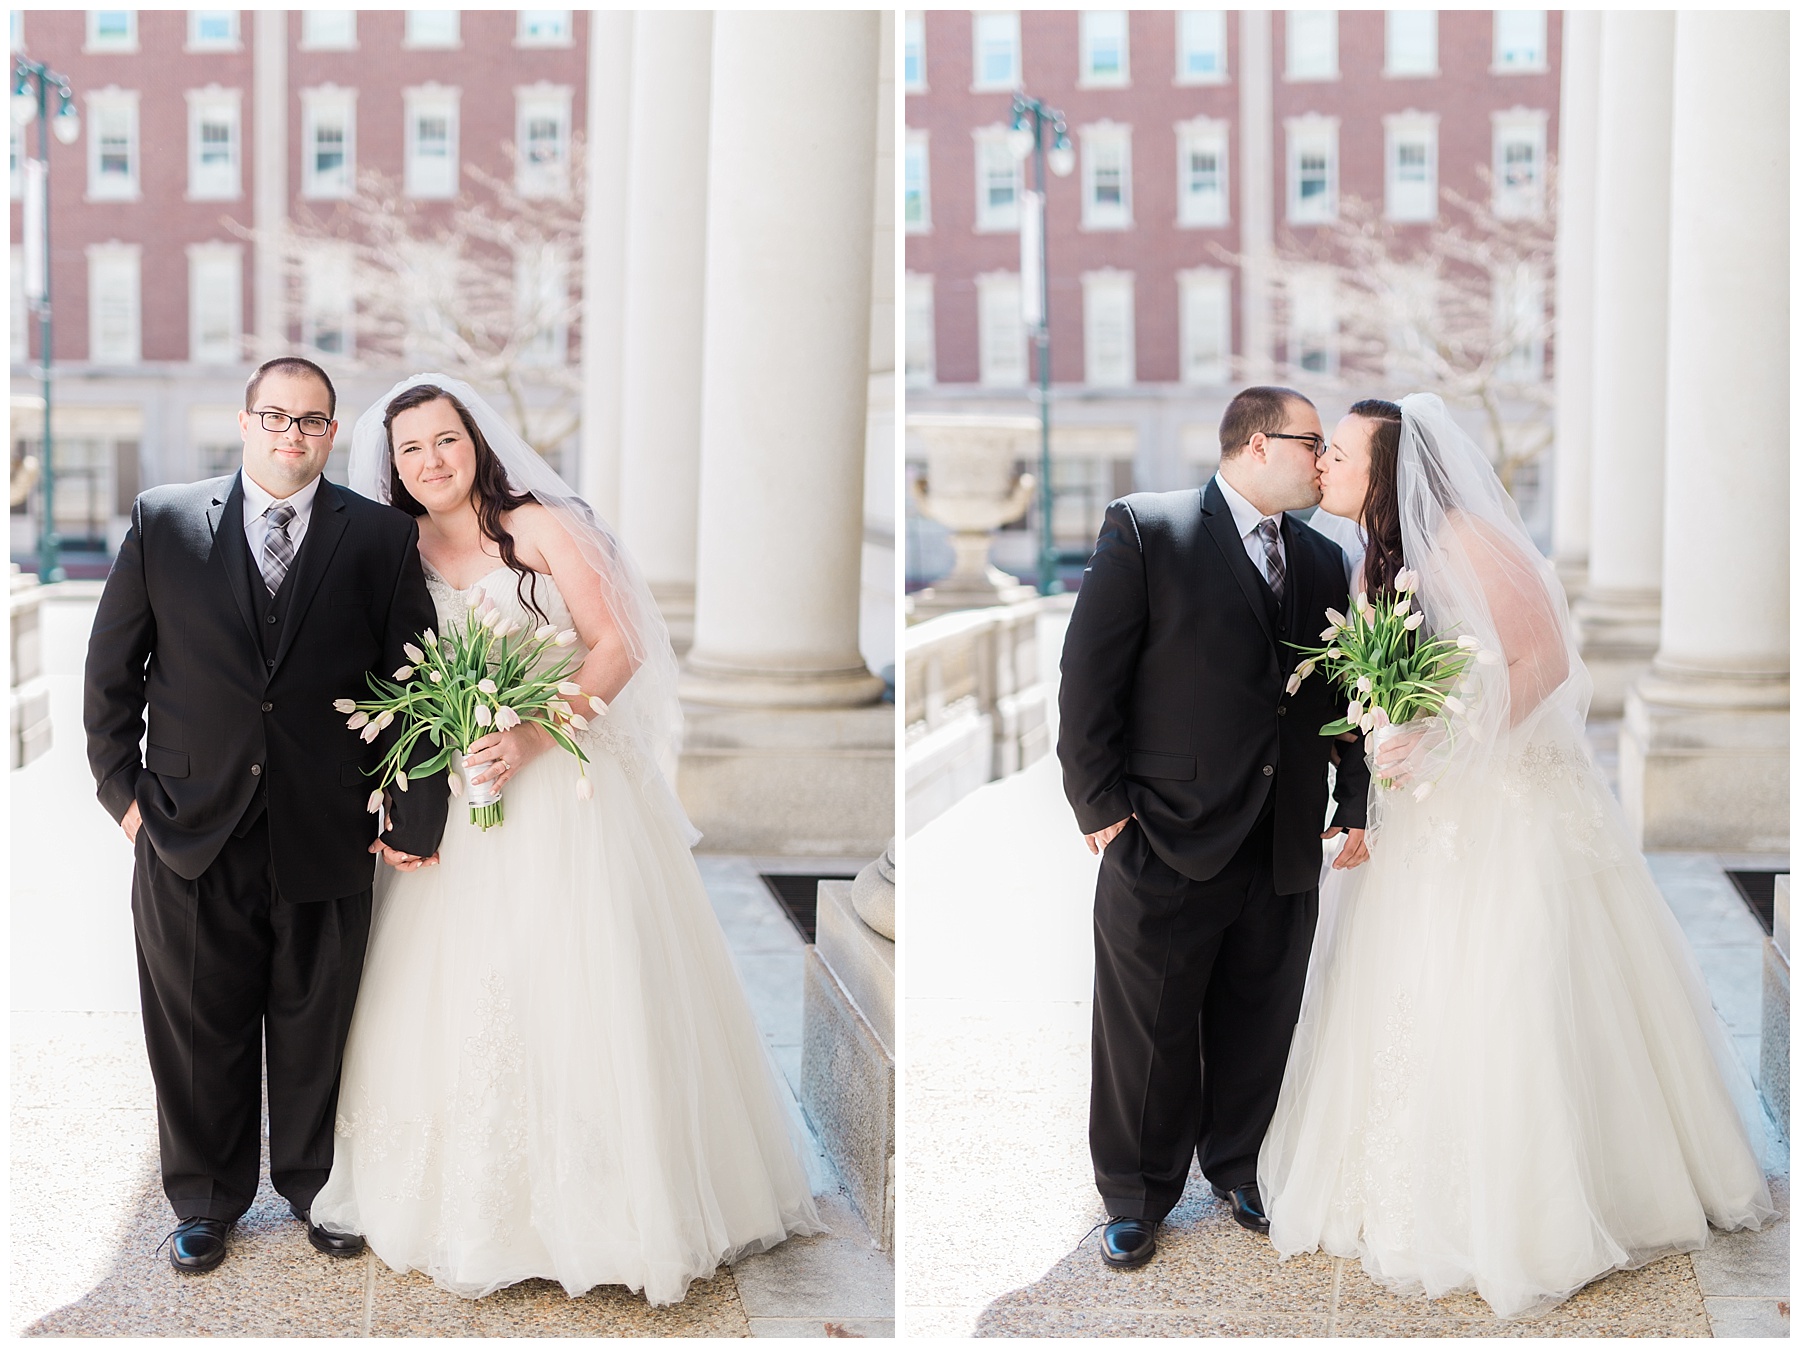 plus size couple in wedding attire taking wedding photos in downtown portland maine at city hall holding tulips